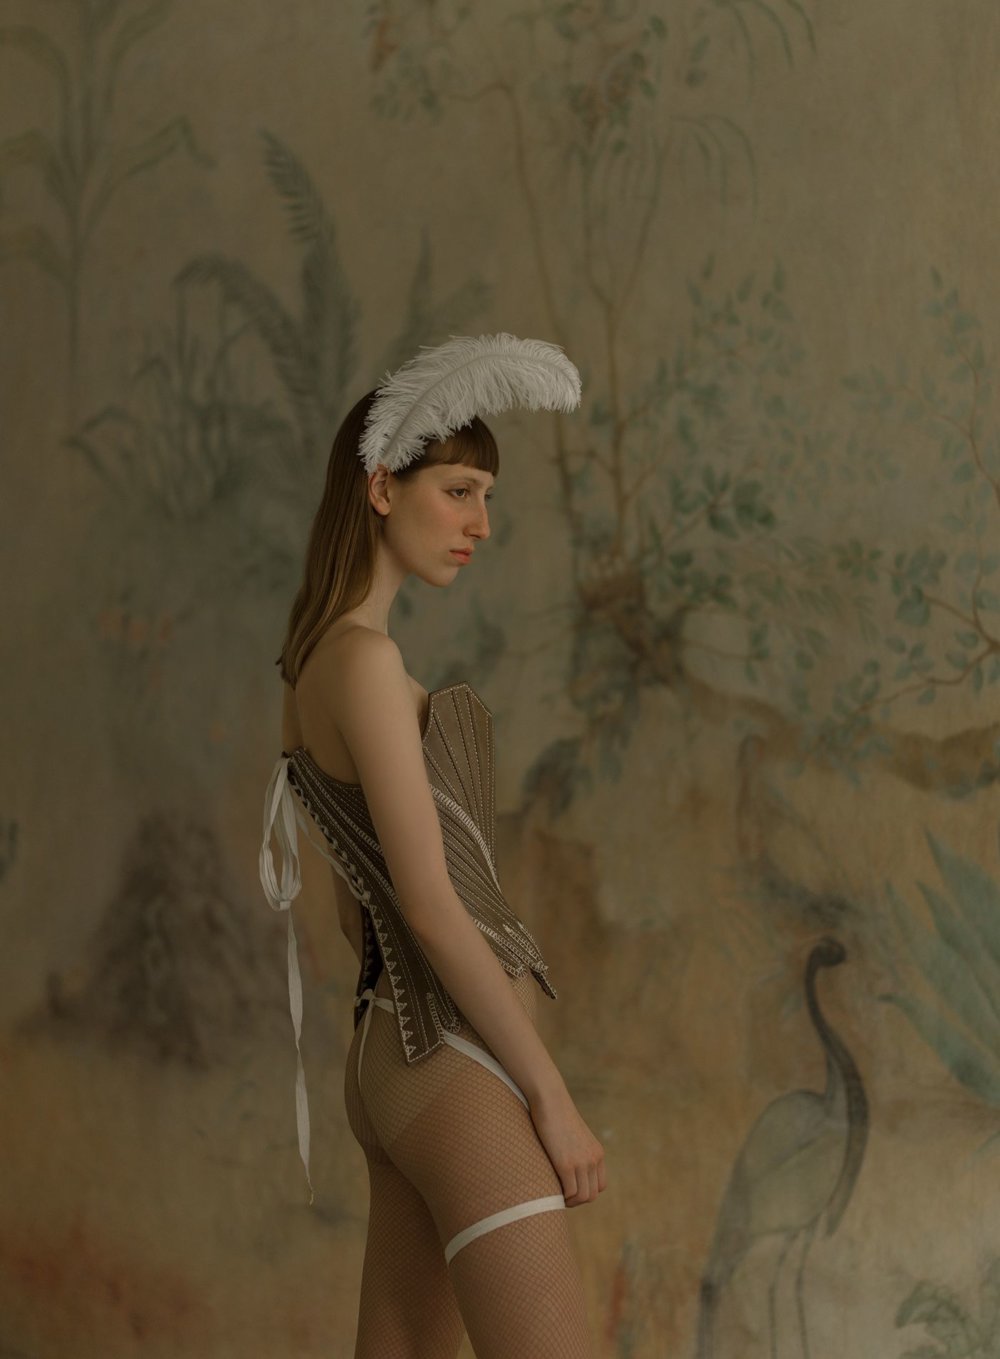 The Marvelously Poetic Editorial And Conceptual Photography Of Evelyn Bencicova 18